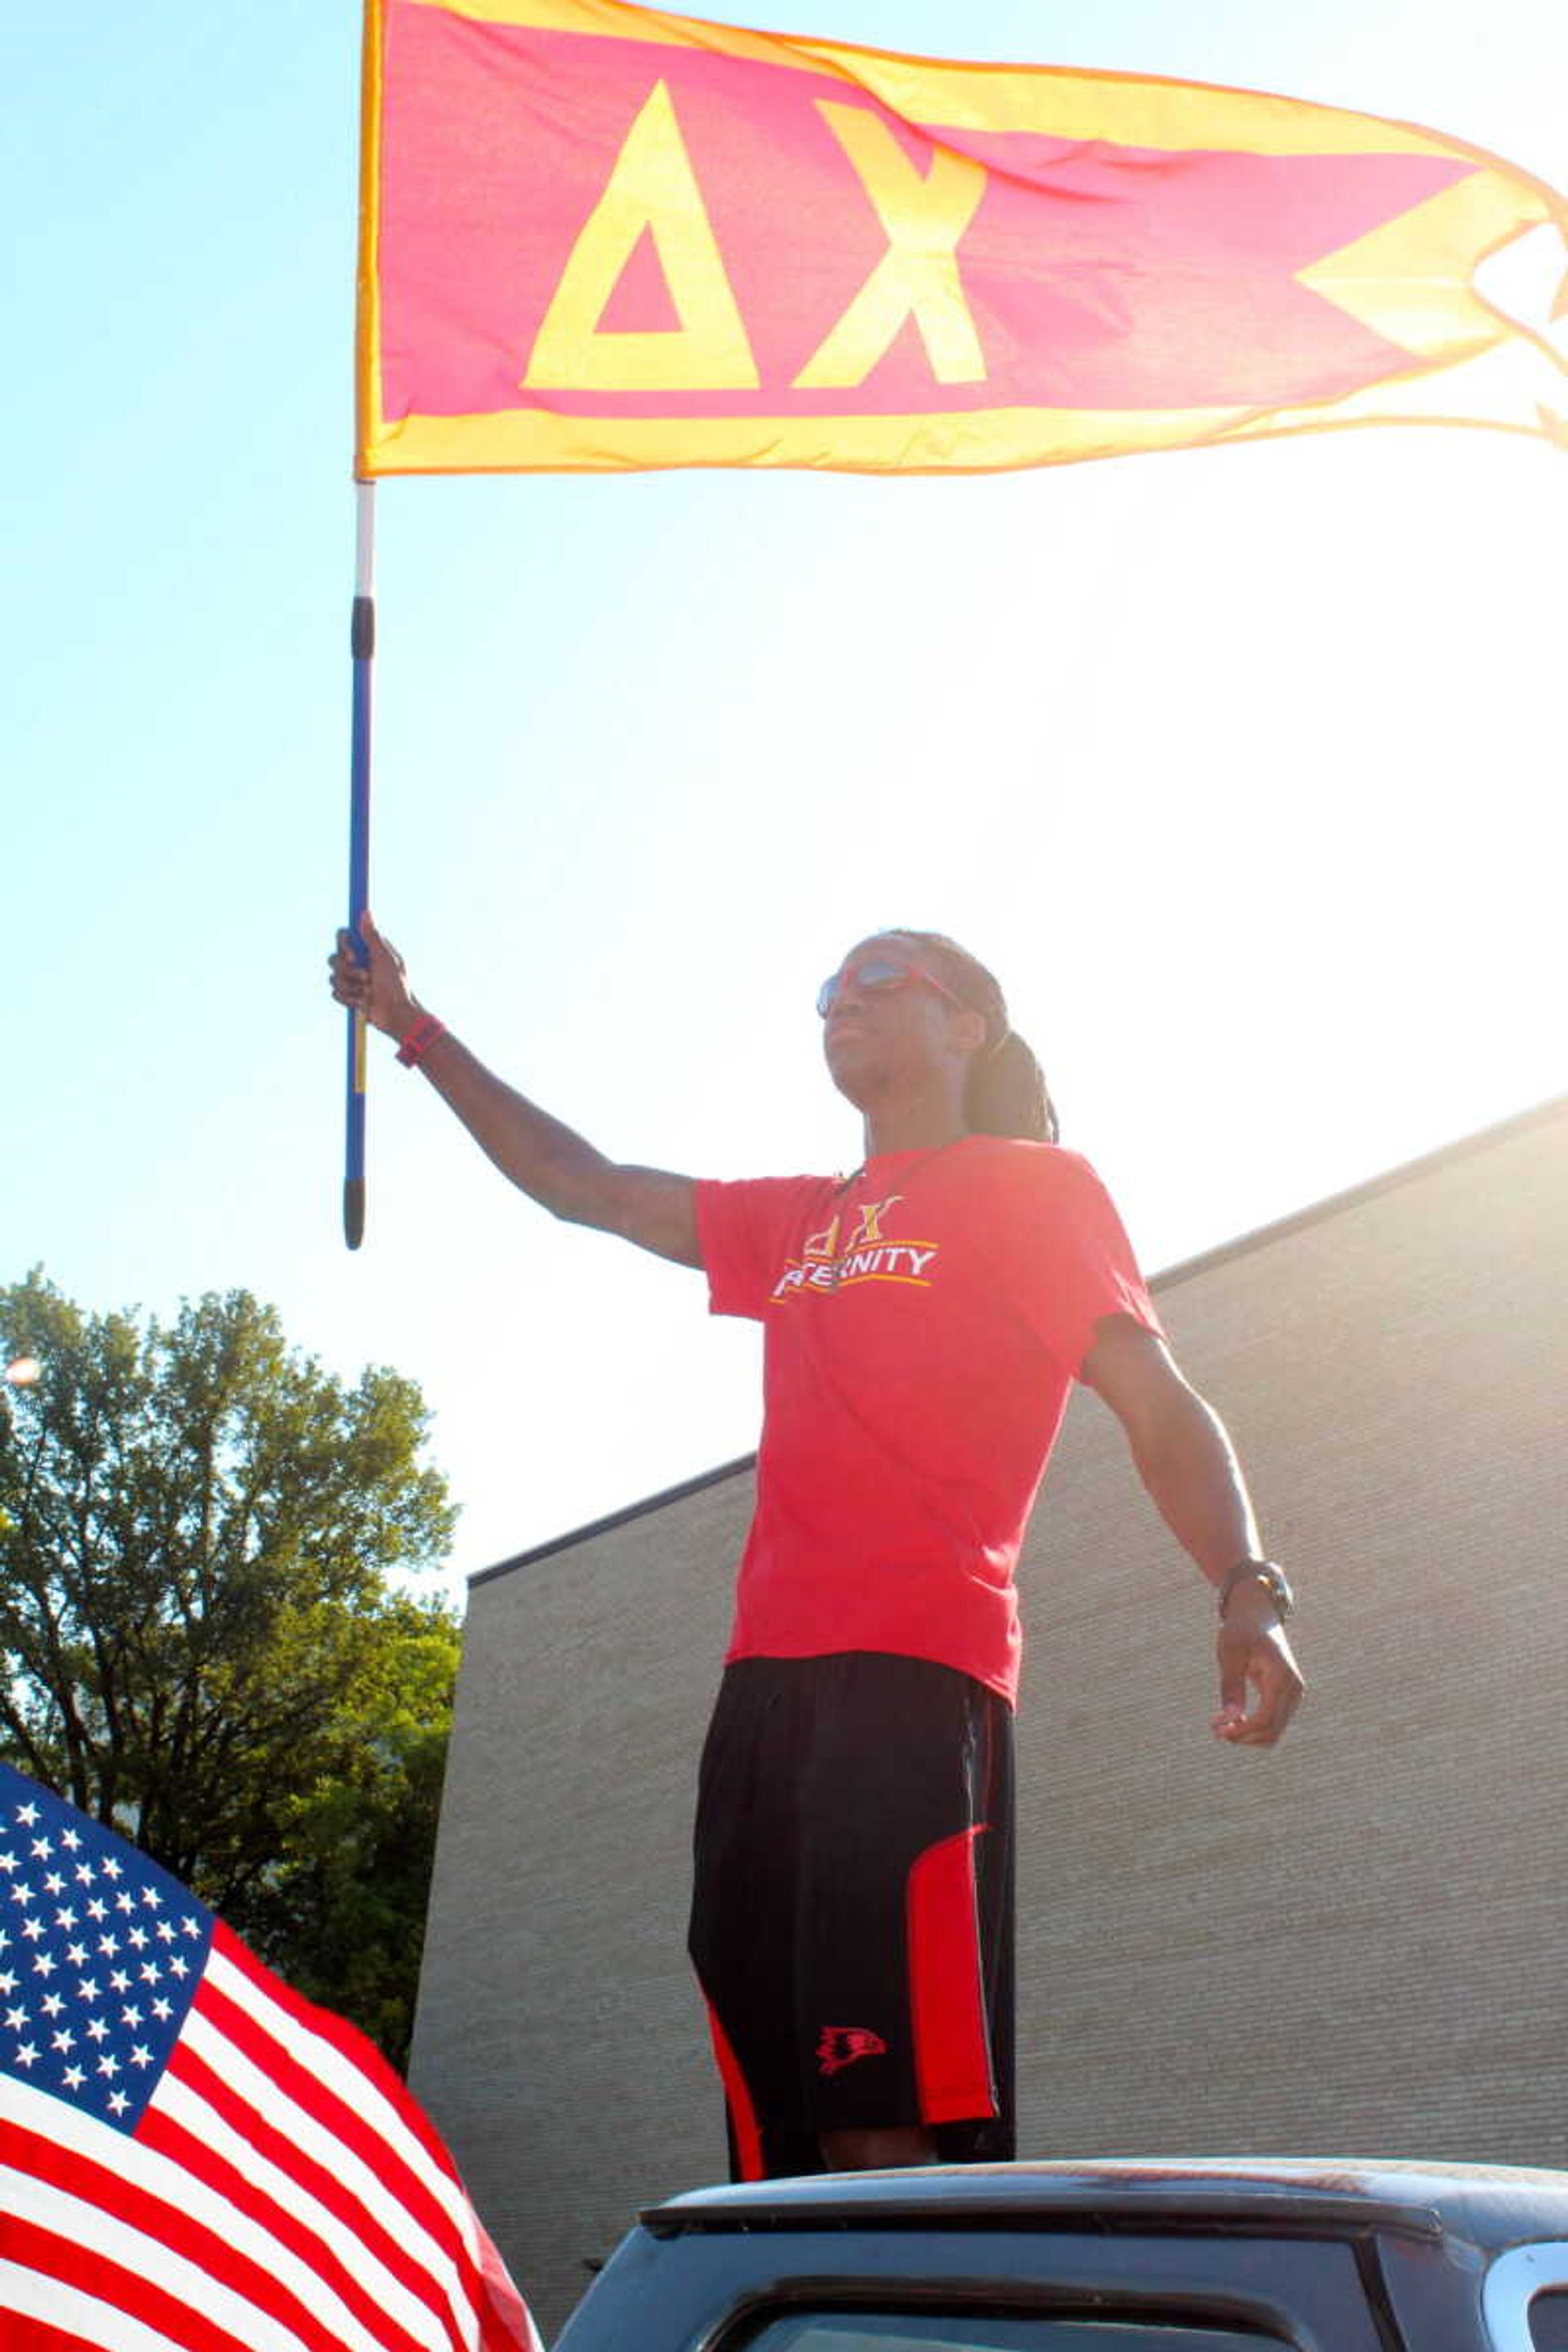  Delta Chi member holding his fraternity's flag.  Photo by Jami Black